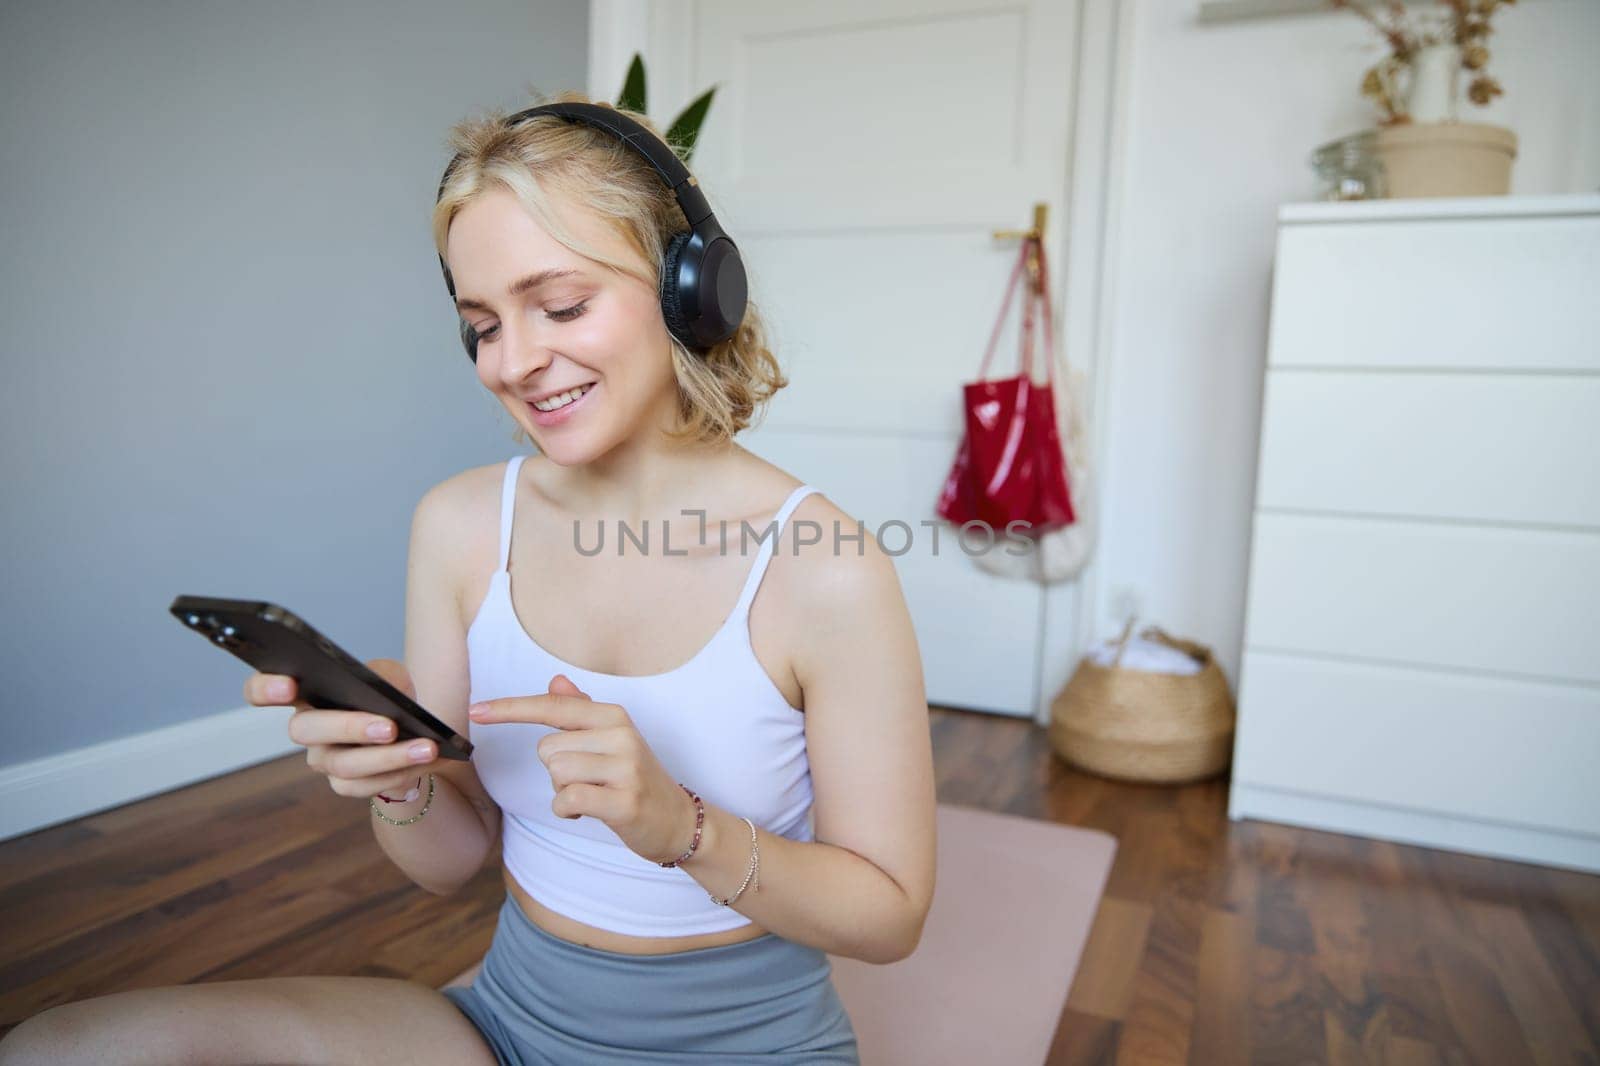 Close up portrait of blond young woman choosing fitness podcast, looking at her mobile phone, checking workout app on smartphone, wearing wireless headphones.